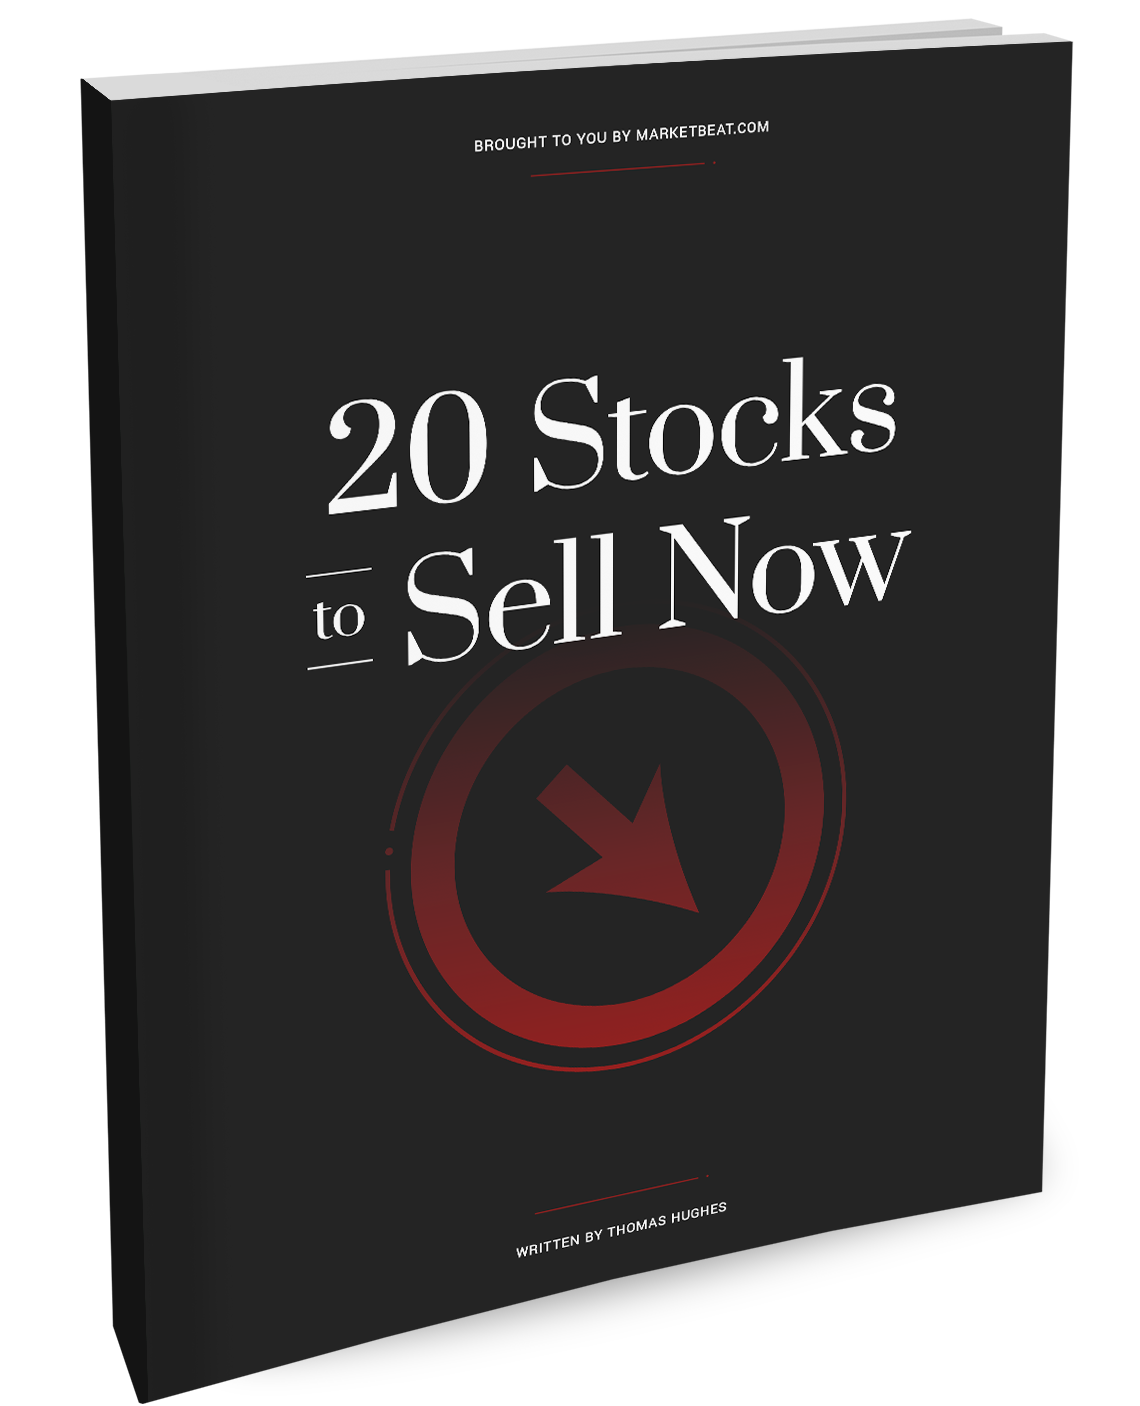 20 stocks to sell now covers